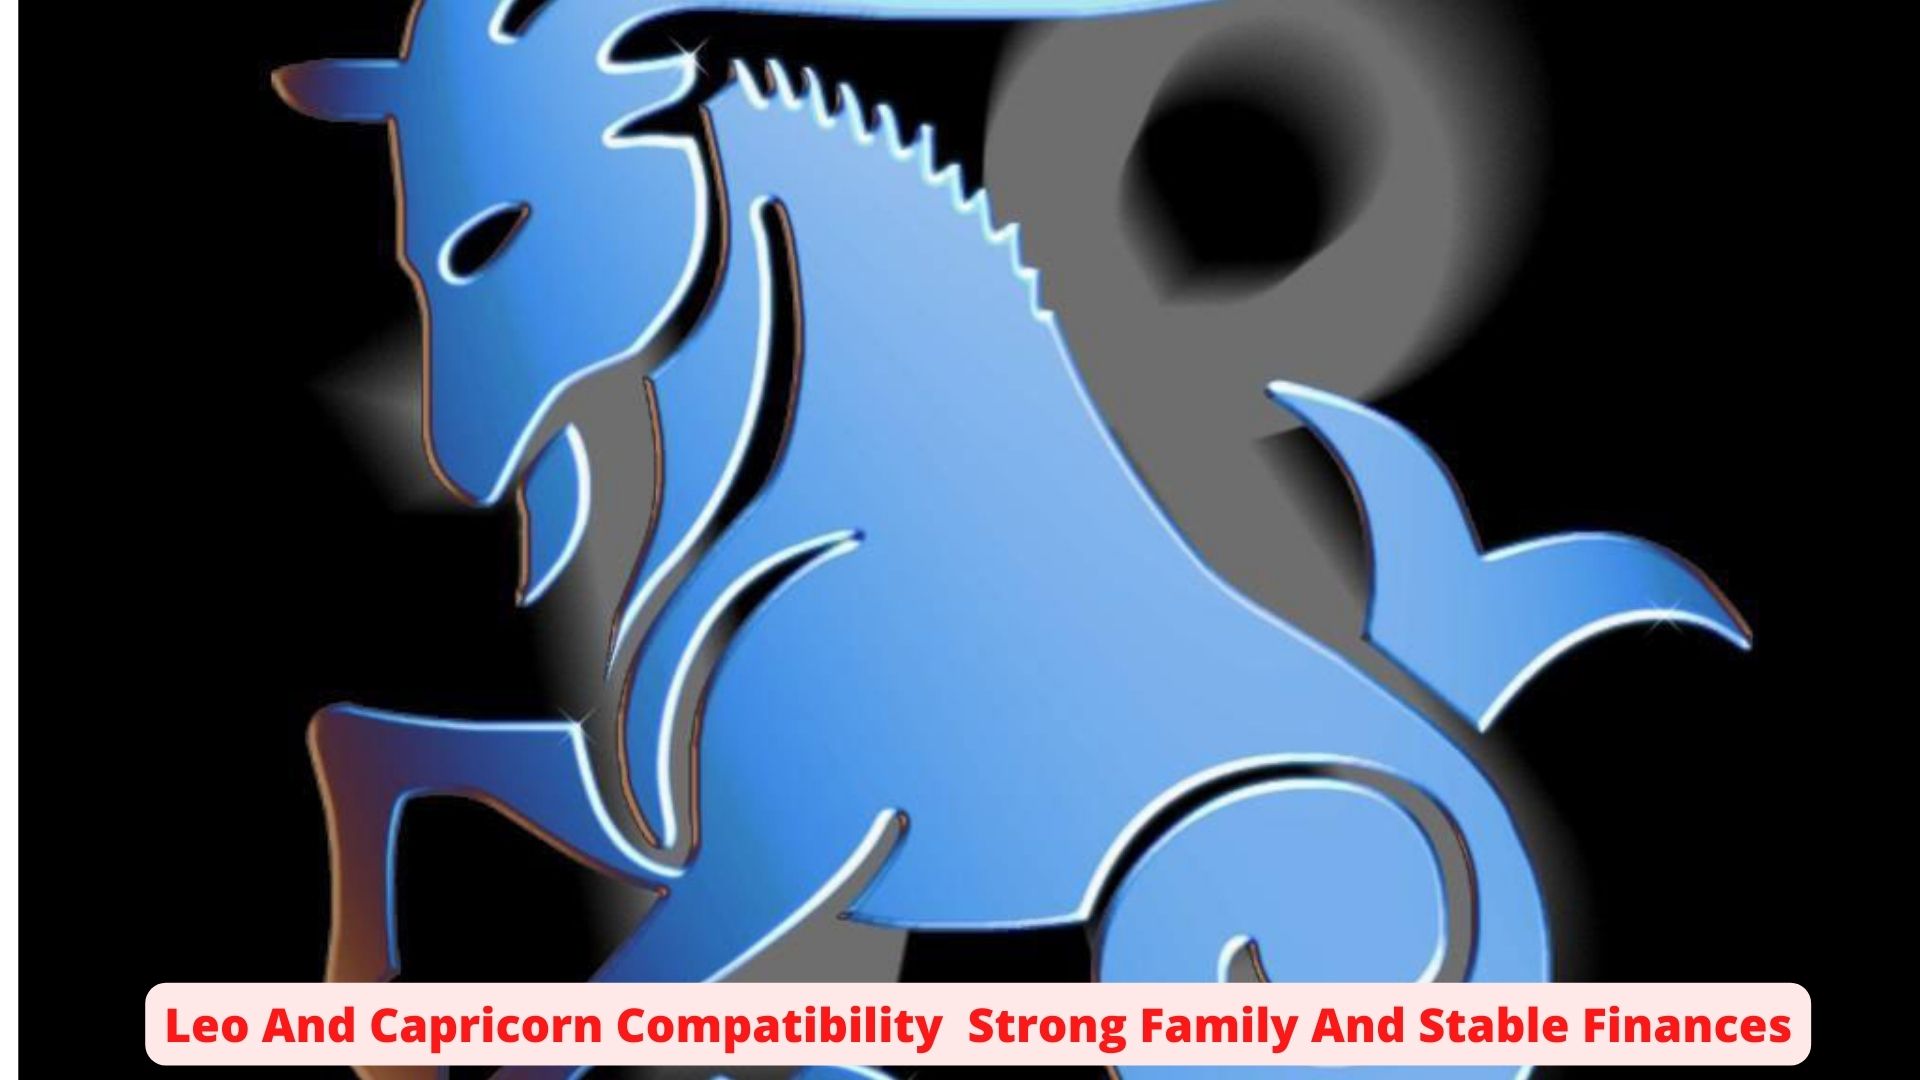 Leo And Capricorn Compatibility - Strong Family And Stable Finances